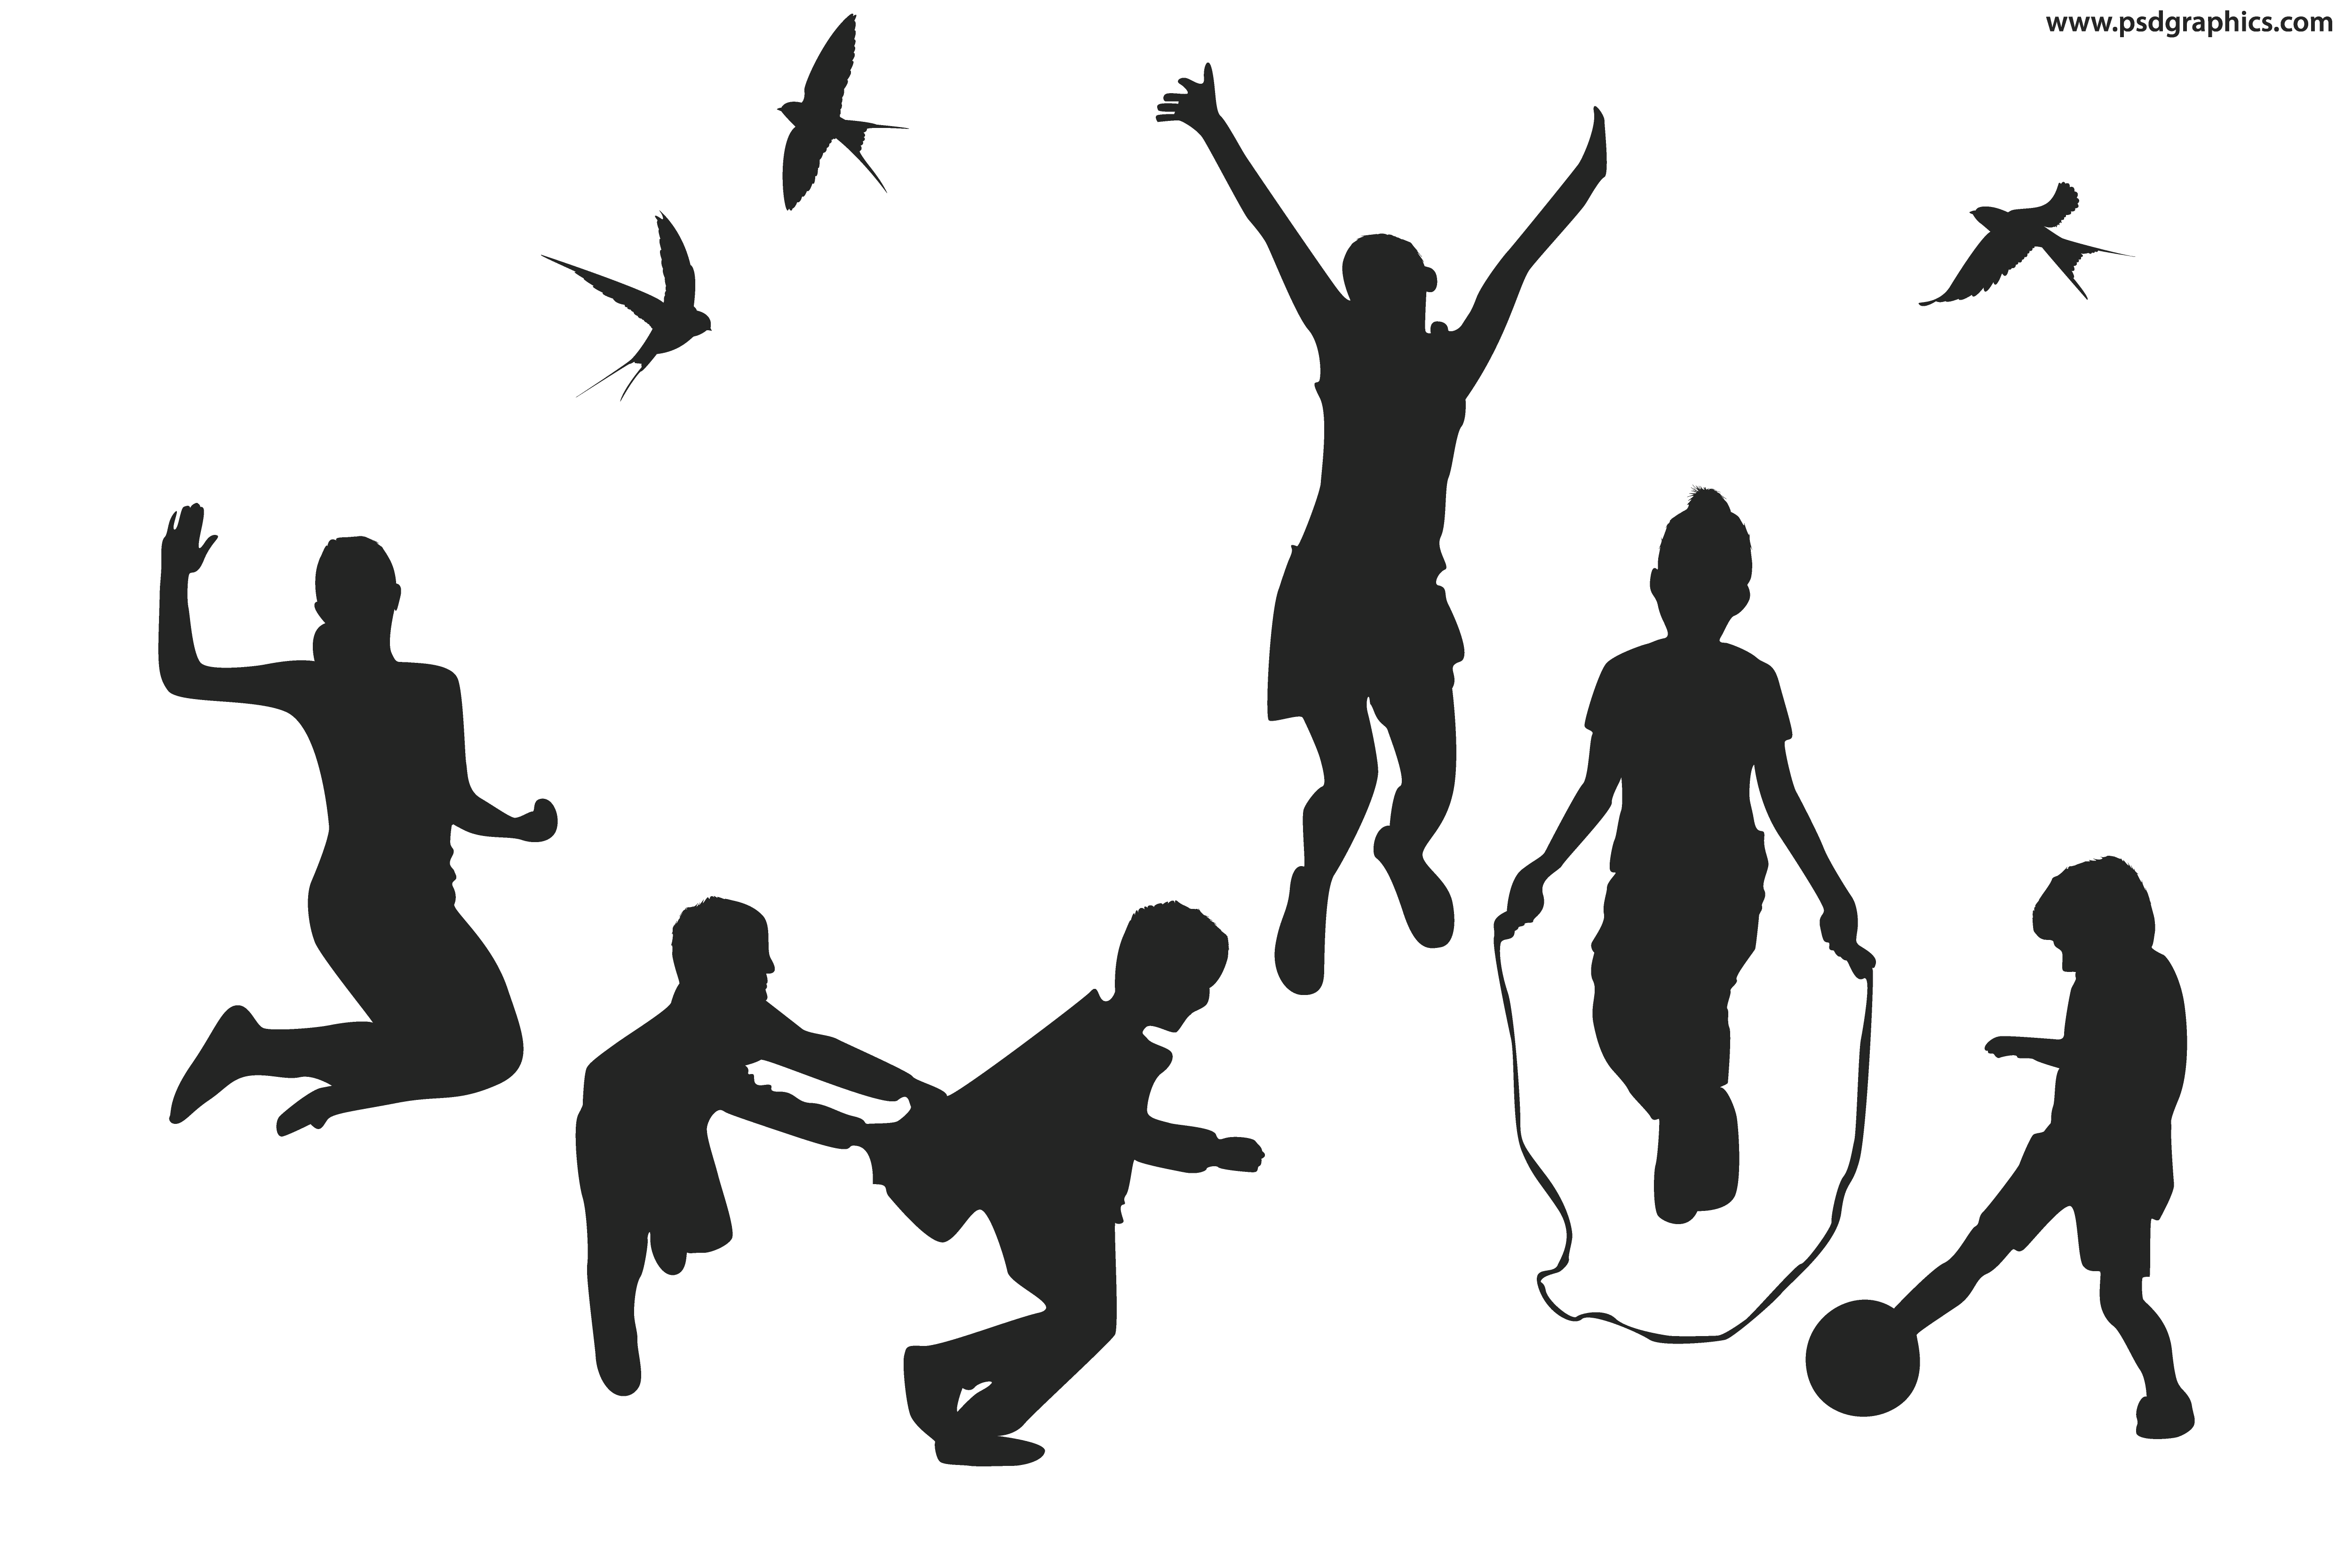 Kids playing silhouette at. Volleyball clipart child